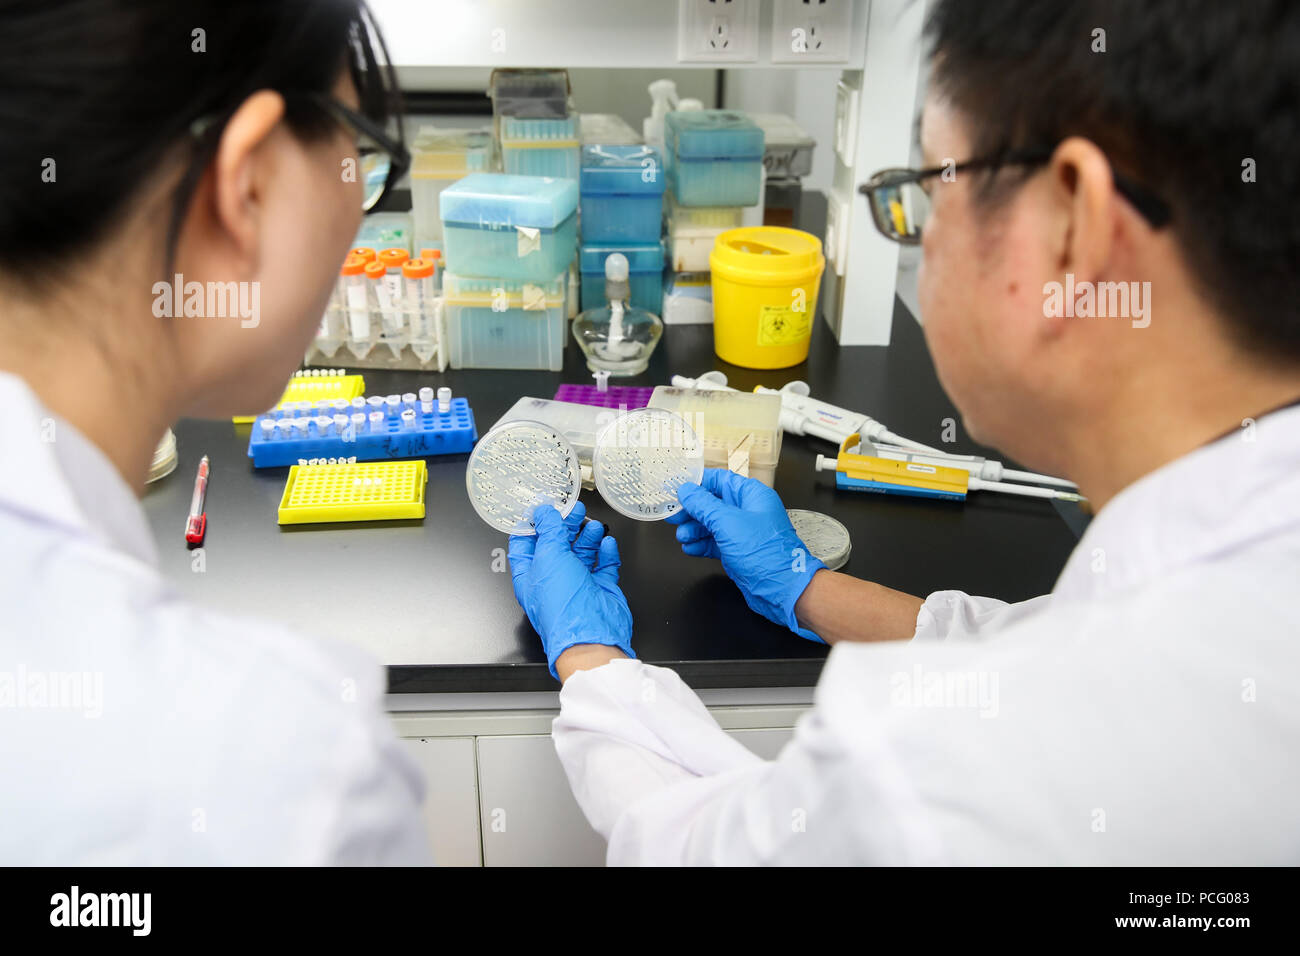 (180802) -- SHANGHAI, Aug. 2, 2018 (Xinhua) -- Qin Zhongjun (R), a molecular biologist at the Center for Excellence in Molecular Plant Sciences of the Shanghai Institute of Plant Physiology and Ecology under the Chinese Academy of Sciences, discusses with his team member in Shanghai, east China, July 31, 2018. Brewer's yeast, one-third of whose genome is said to share ancestry with humans, has 16 chromosomes. However, Chinese scientists have managed to fit nearly all its genetic material into just one chromosome while not affecting the majority of its functions, according to a paper released T Stock Photo